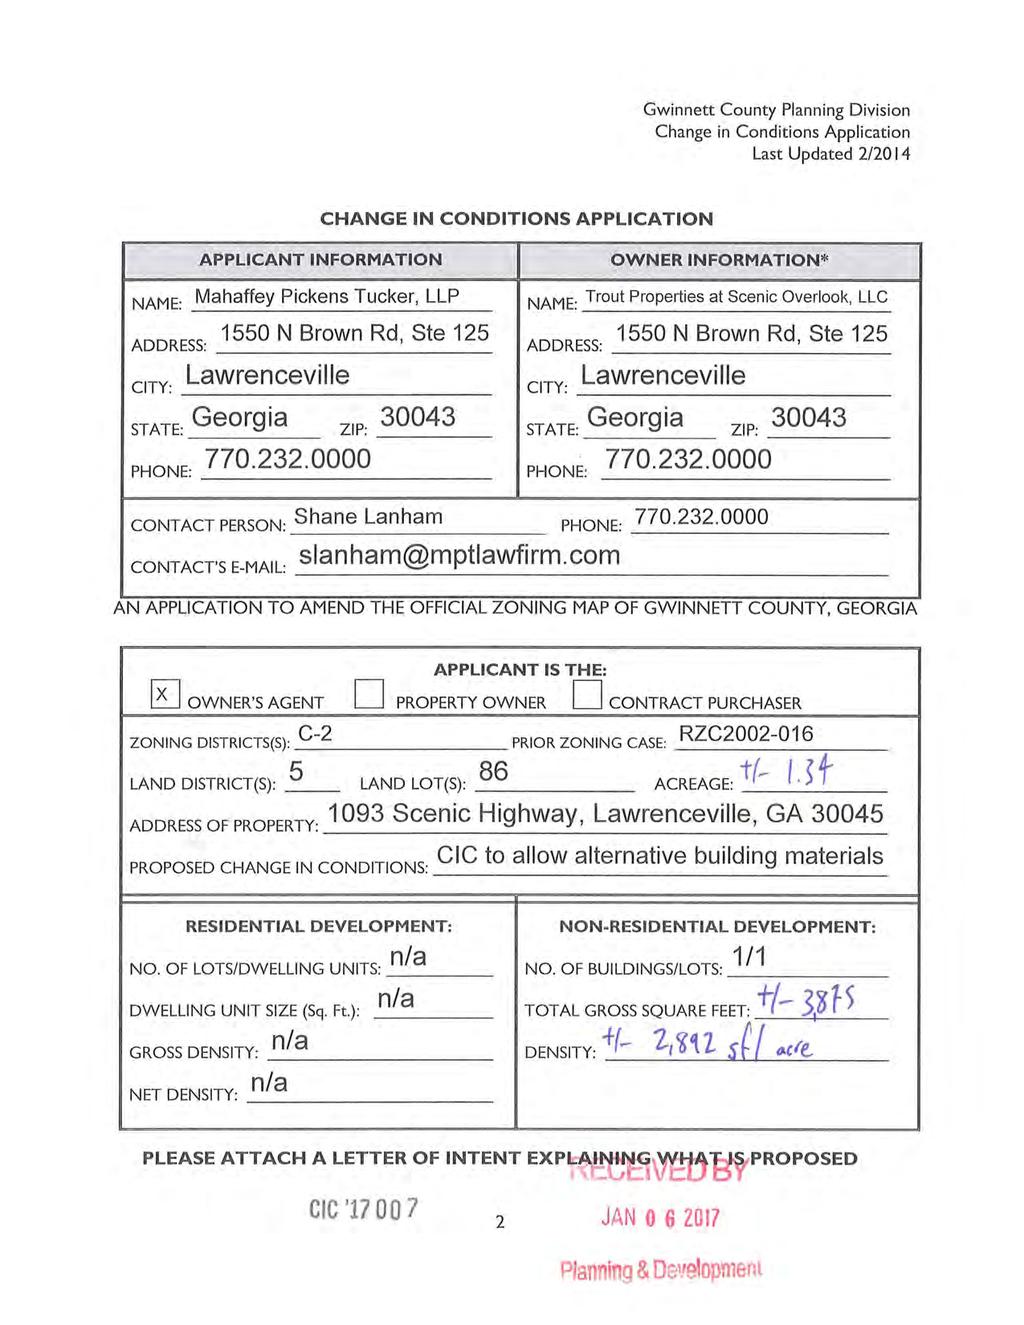 Gwinnett County Planning Division Change in Conditions Application Last Updated 2/20 14 CHANGE N CONDTONS APPLCATON APPLCANT NFORMATON OWNER NFORMATON* NAME: Mahaffey Pickens Tucker, LLP NAME: Trout